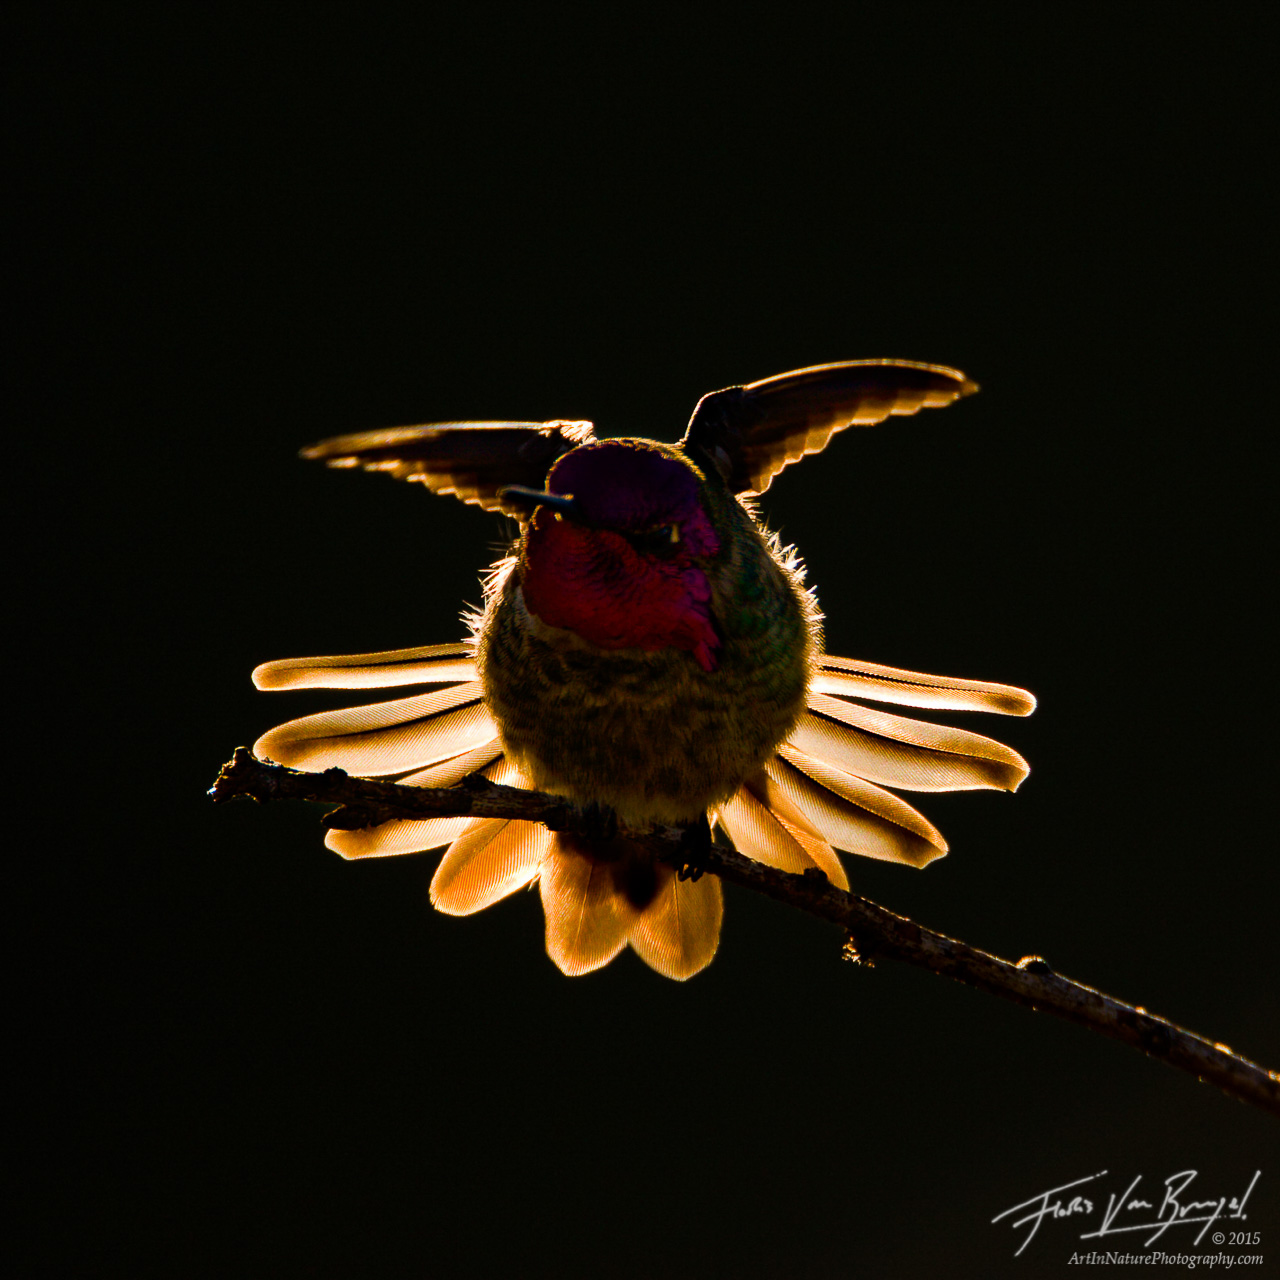 While hummingbirds may appear delicate and fragile, they are one of the more violent birds I've seen. I took this photo of an...